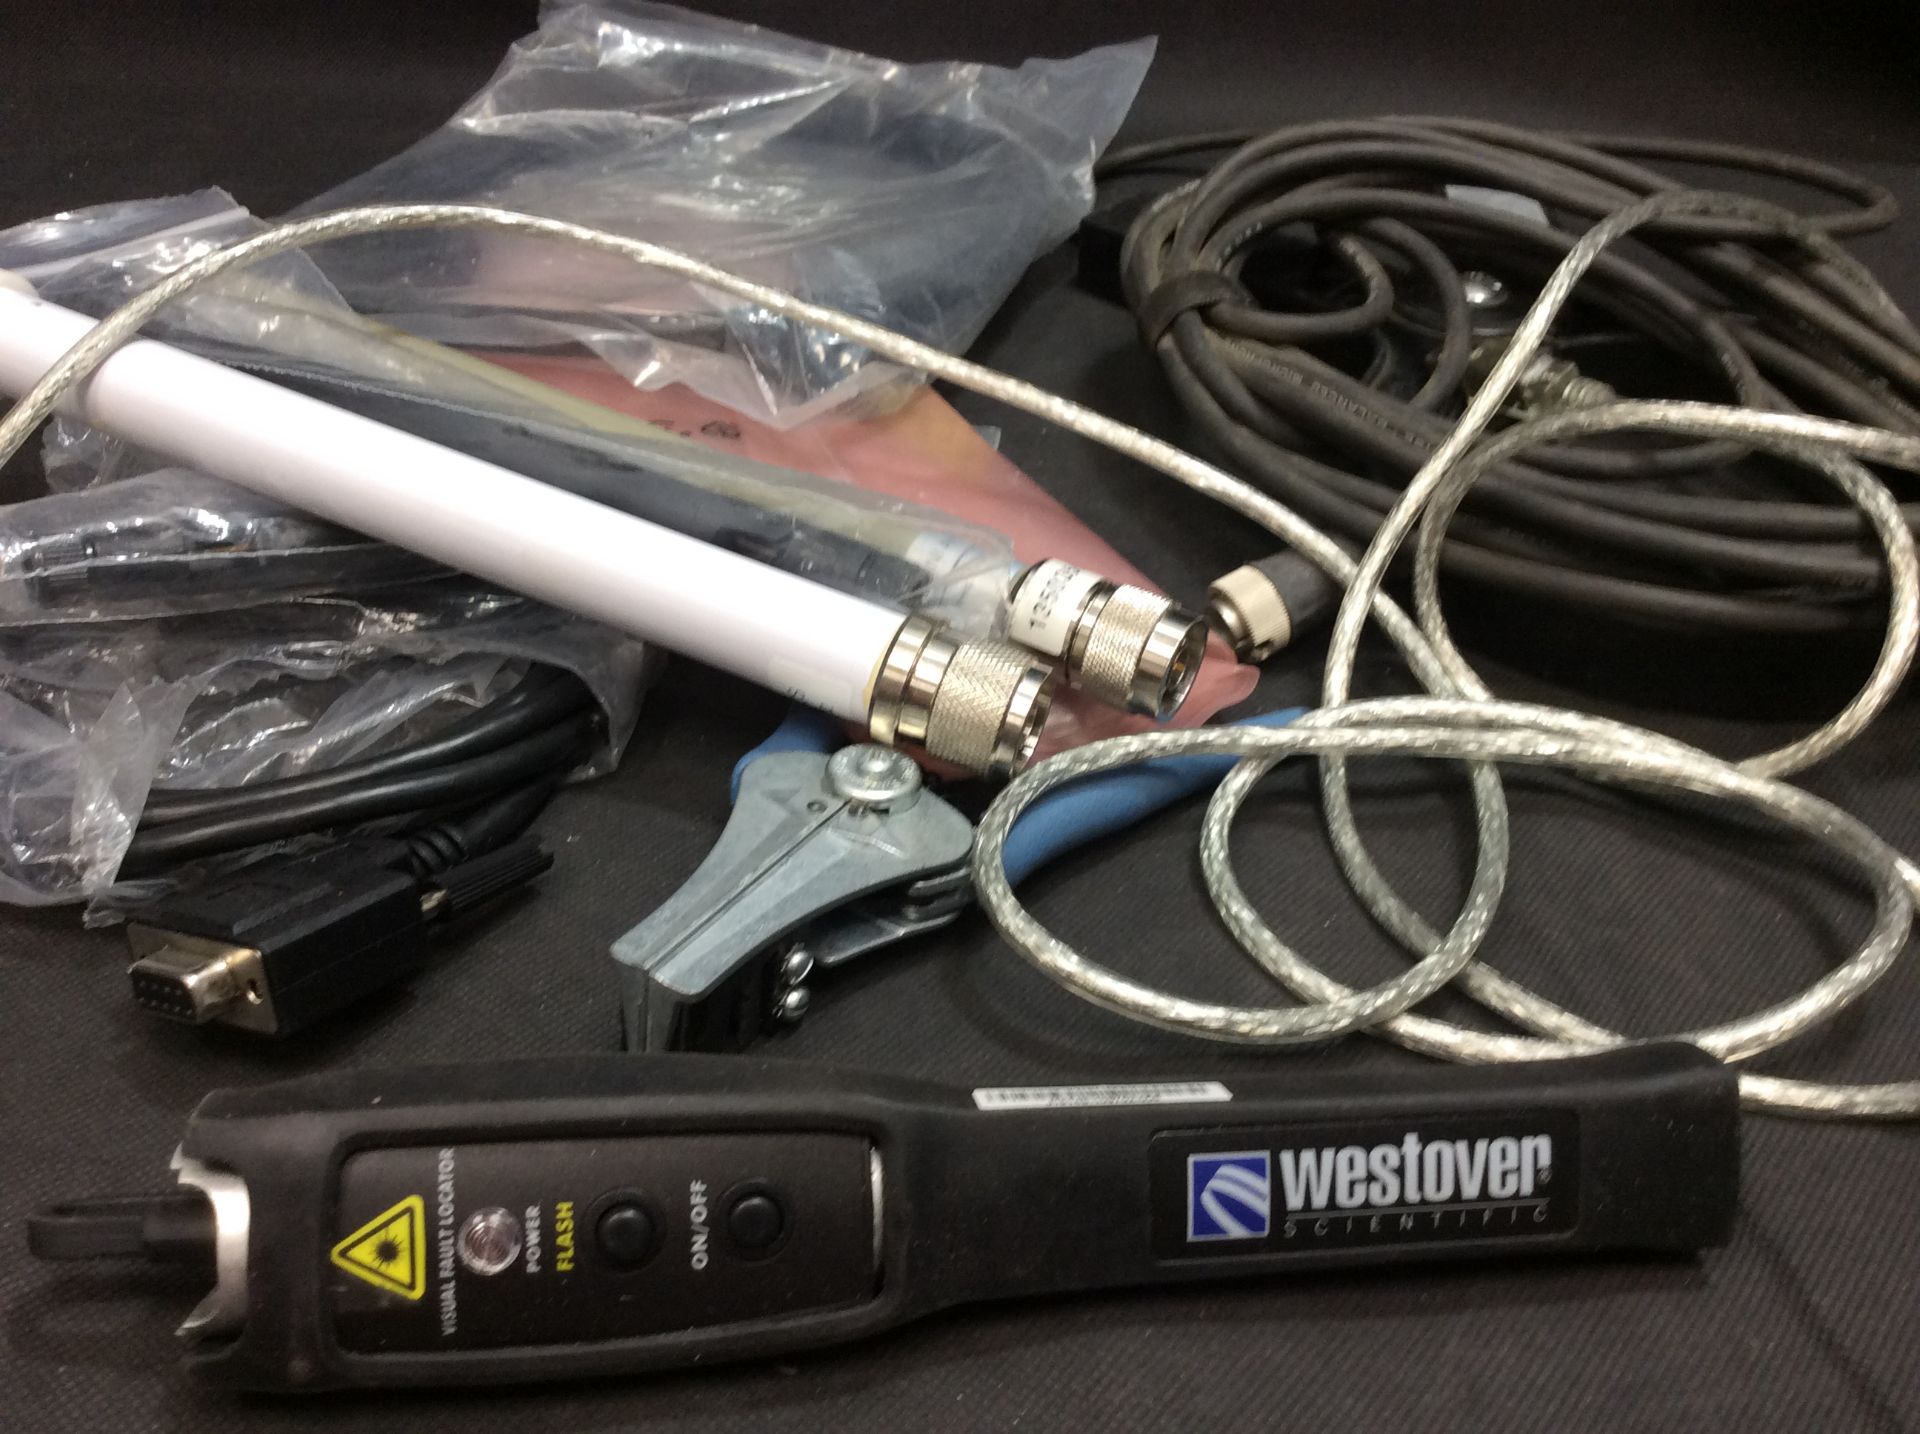 Bag of Mixed Items Incl Ideal L-5620 Stripmaste, Hi-Speed USB Cable, Westover Scientific Laser ect - Image 2 of 2